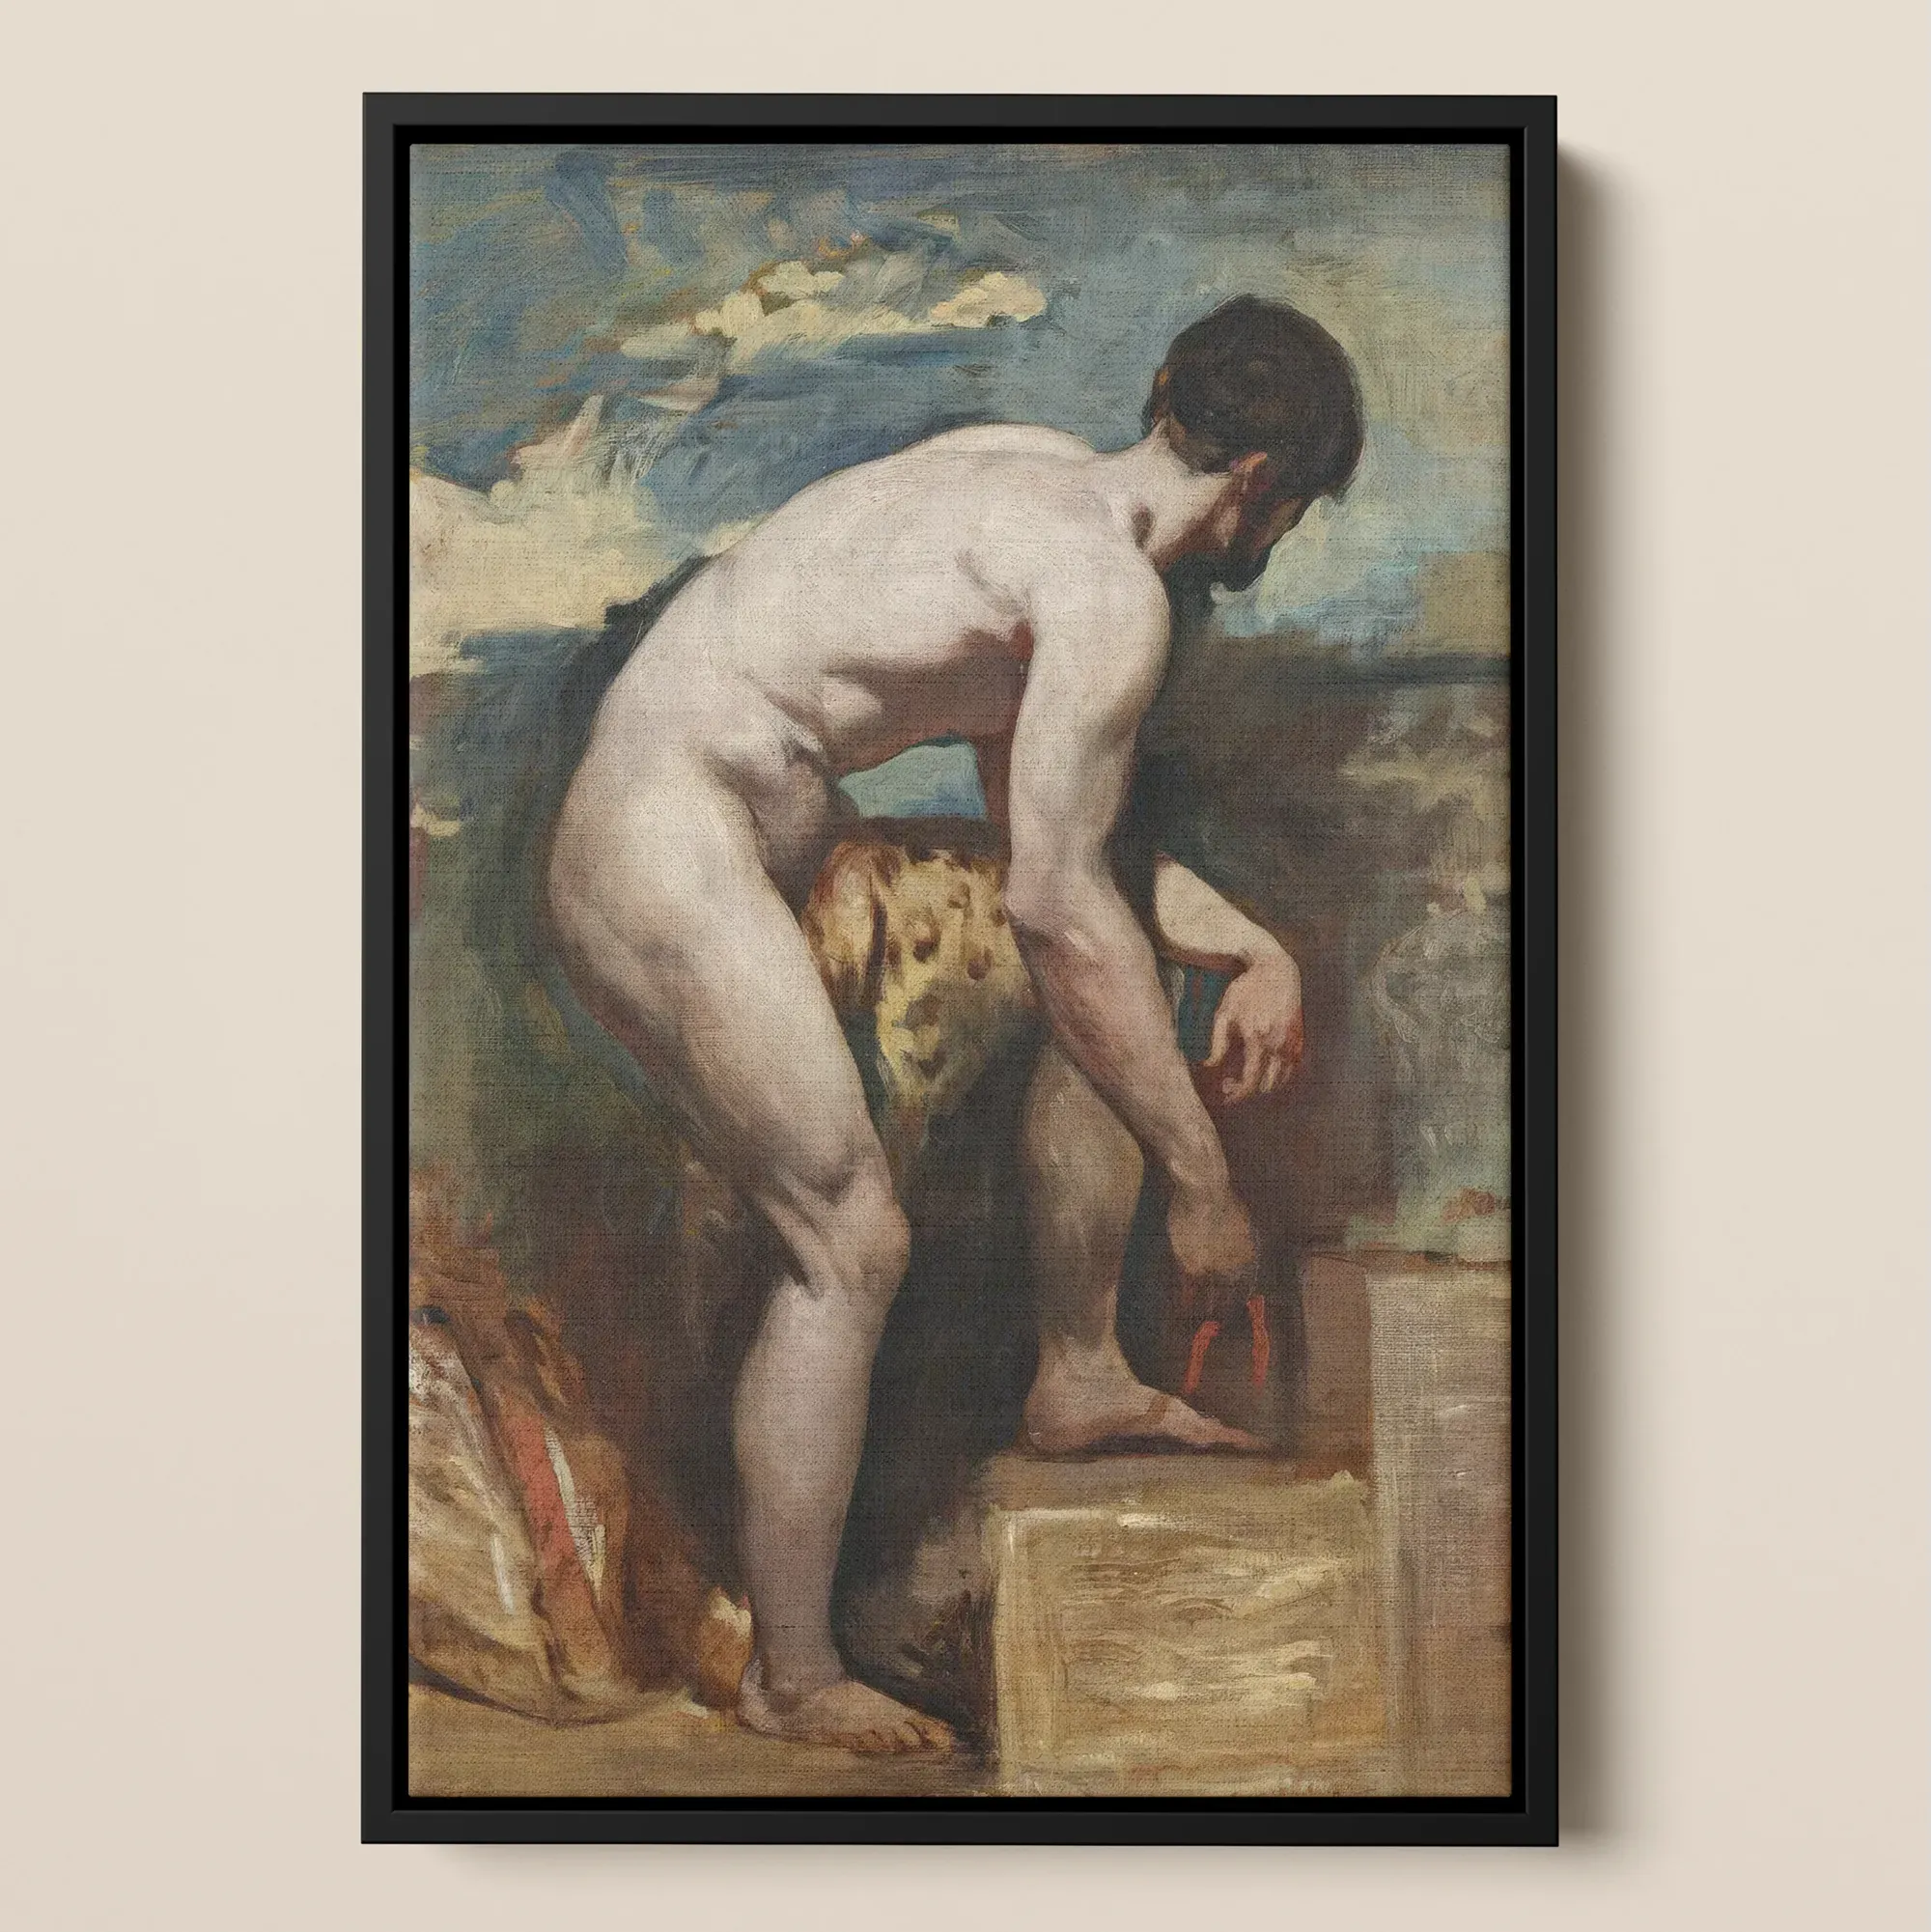 Nude Man Tying His Sandal - William Etty Framed Canvas - Posters Prints & Visual Artwork - Aesthetic Art